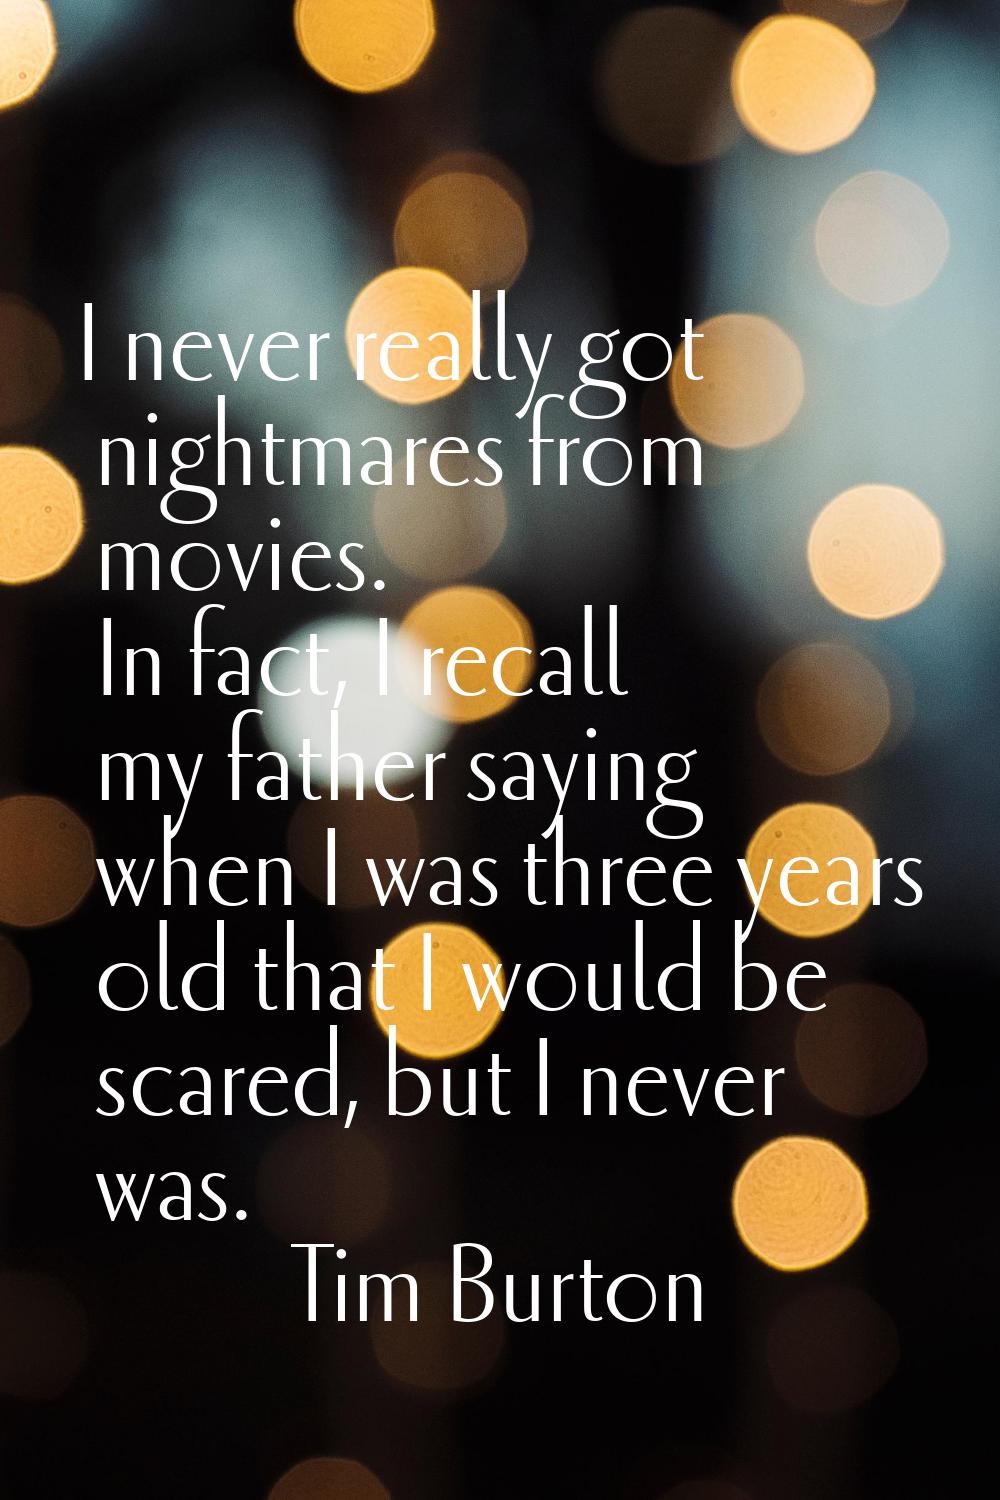 I never really got nightmares from movies. In fact, I recall my father saying when I was three year